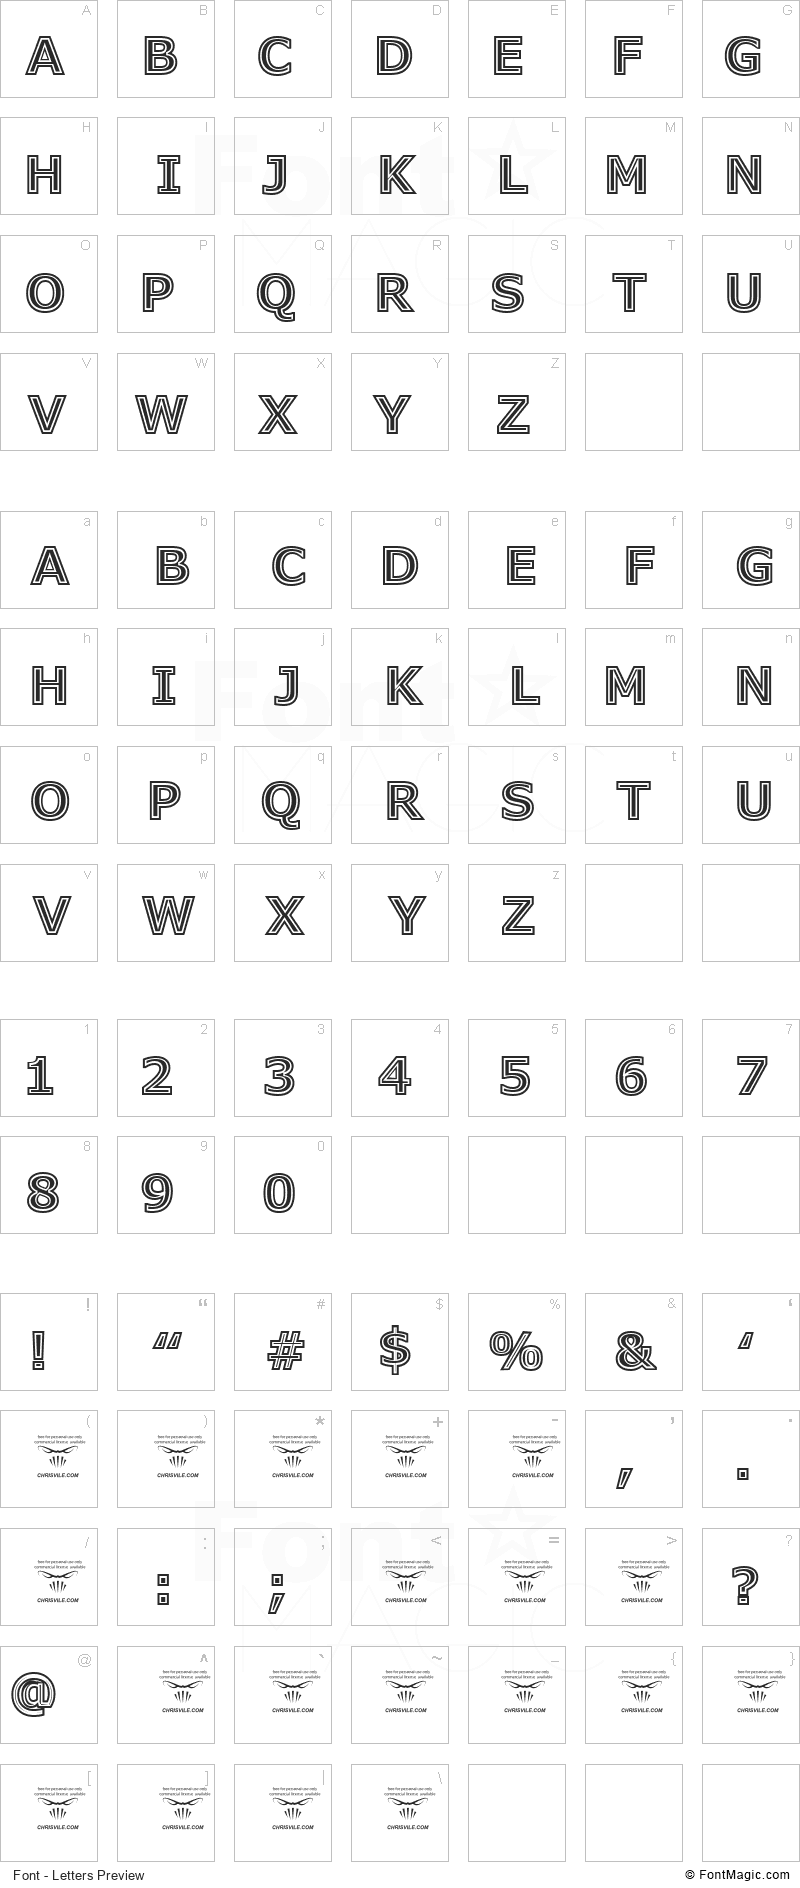 Genesee St Font - All Latters Preview Chart